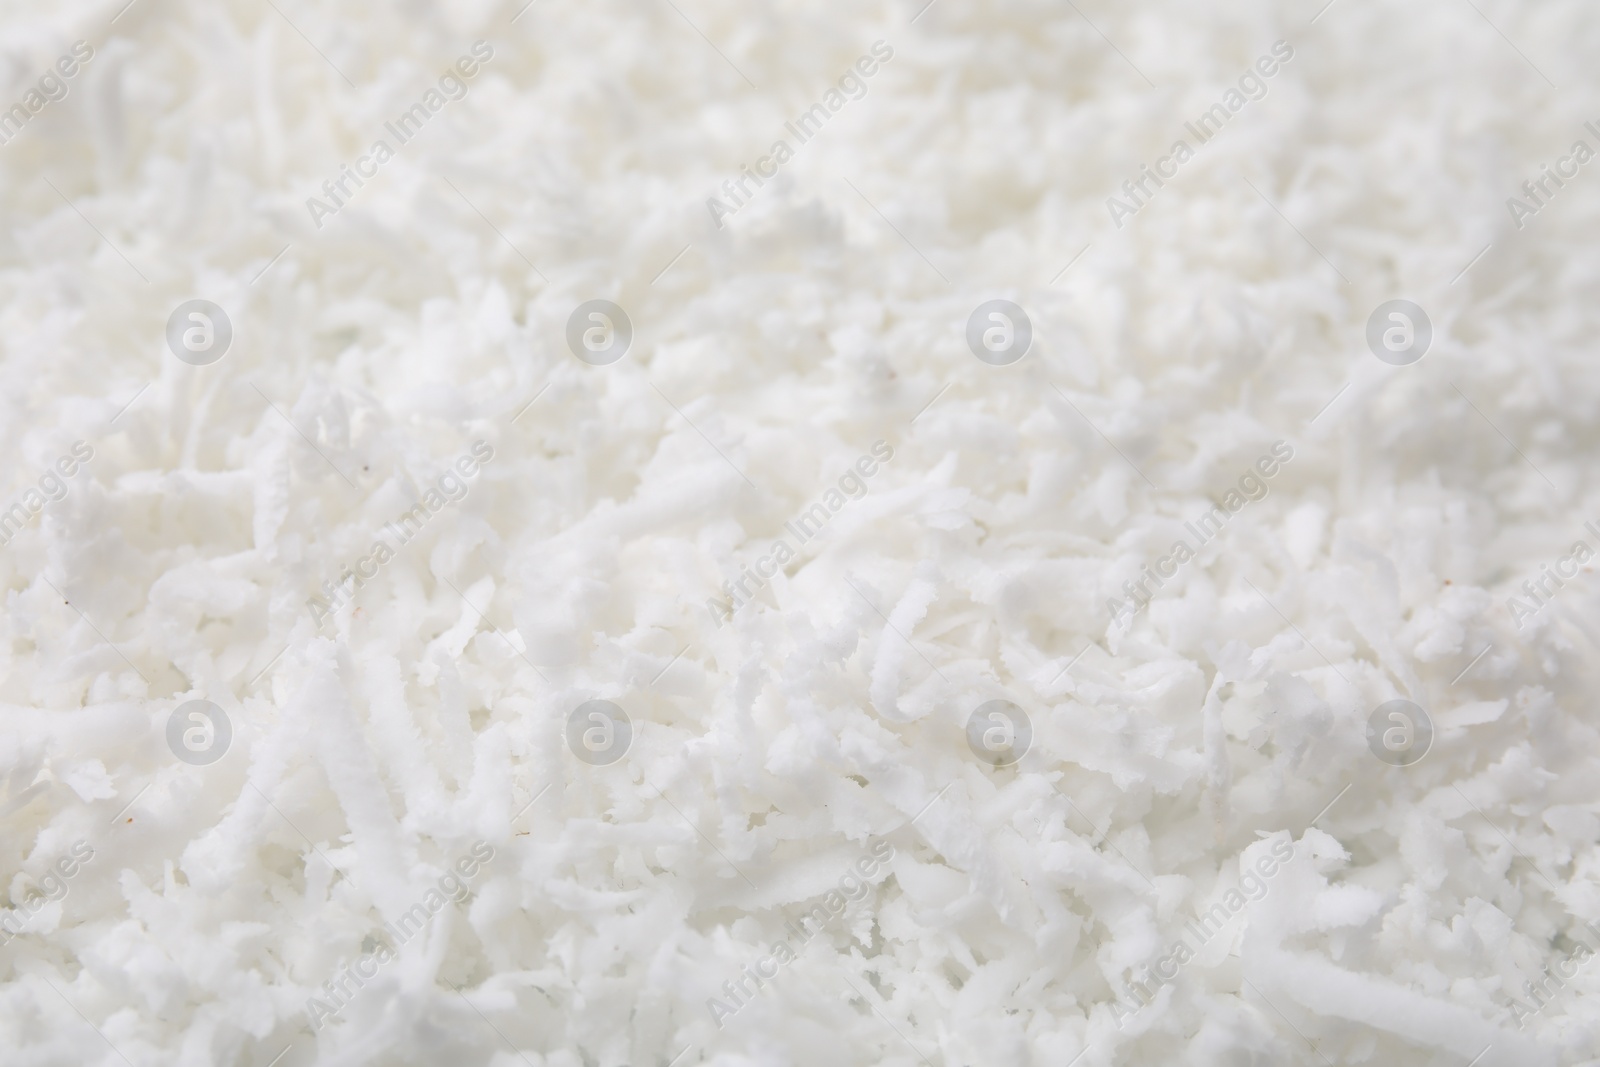 Photo of Fresh coconut flakes as background, closeup view